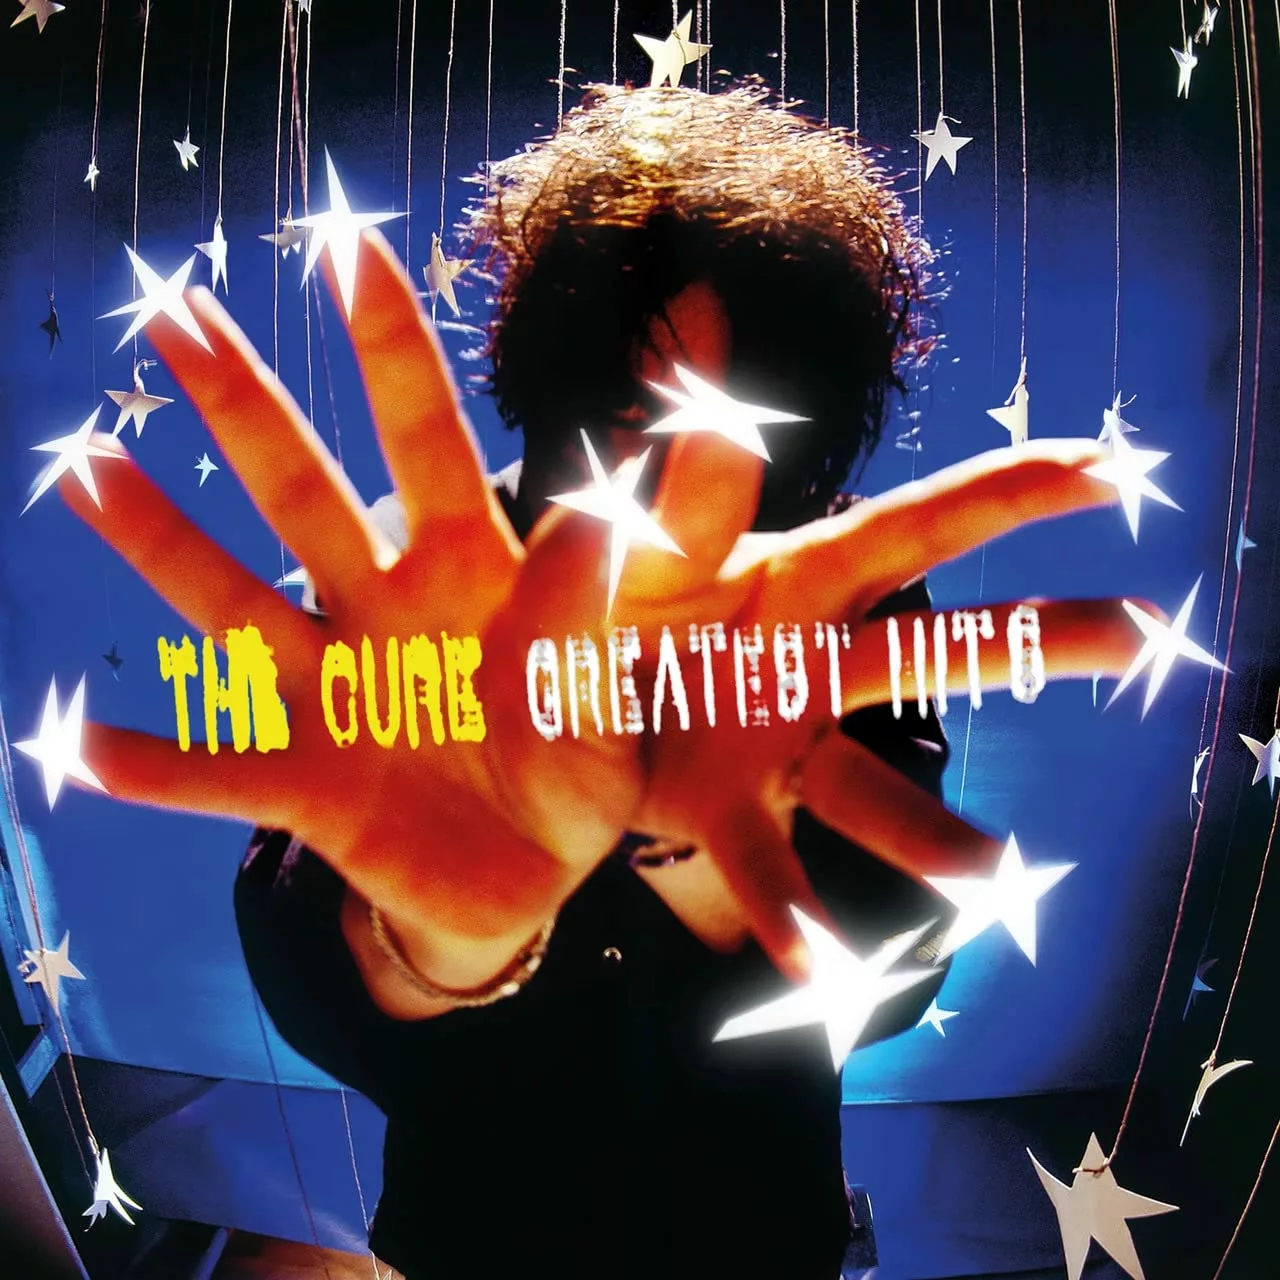 THE CURE - Greatest Hits [BLACK DLP]